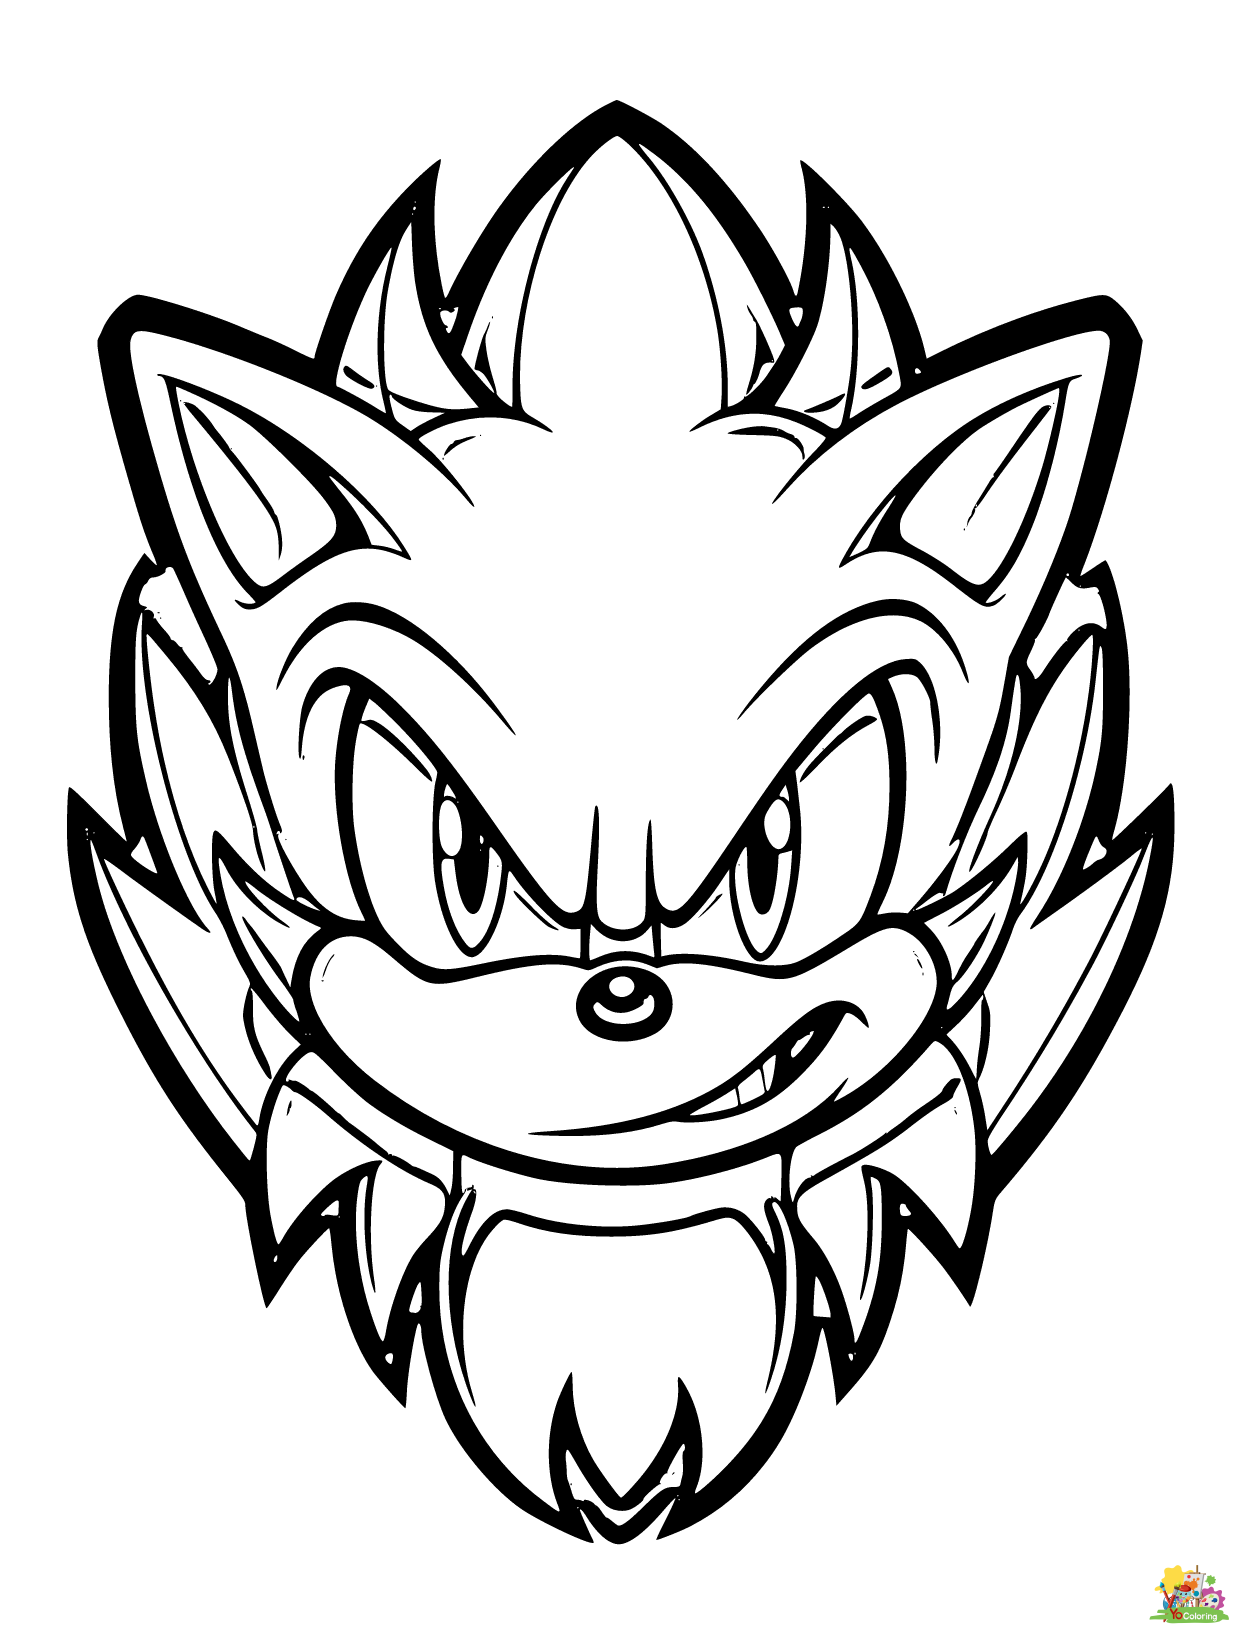 Sonic Hedgehog Printable Coloring Pages - Get Coloring Pages